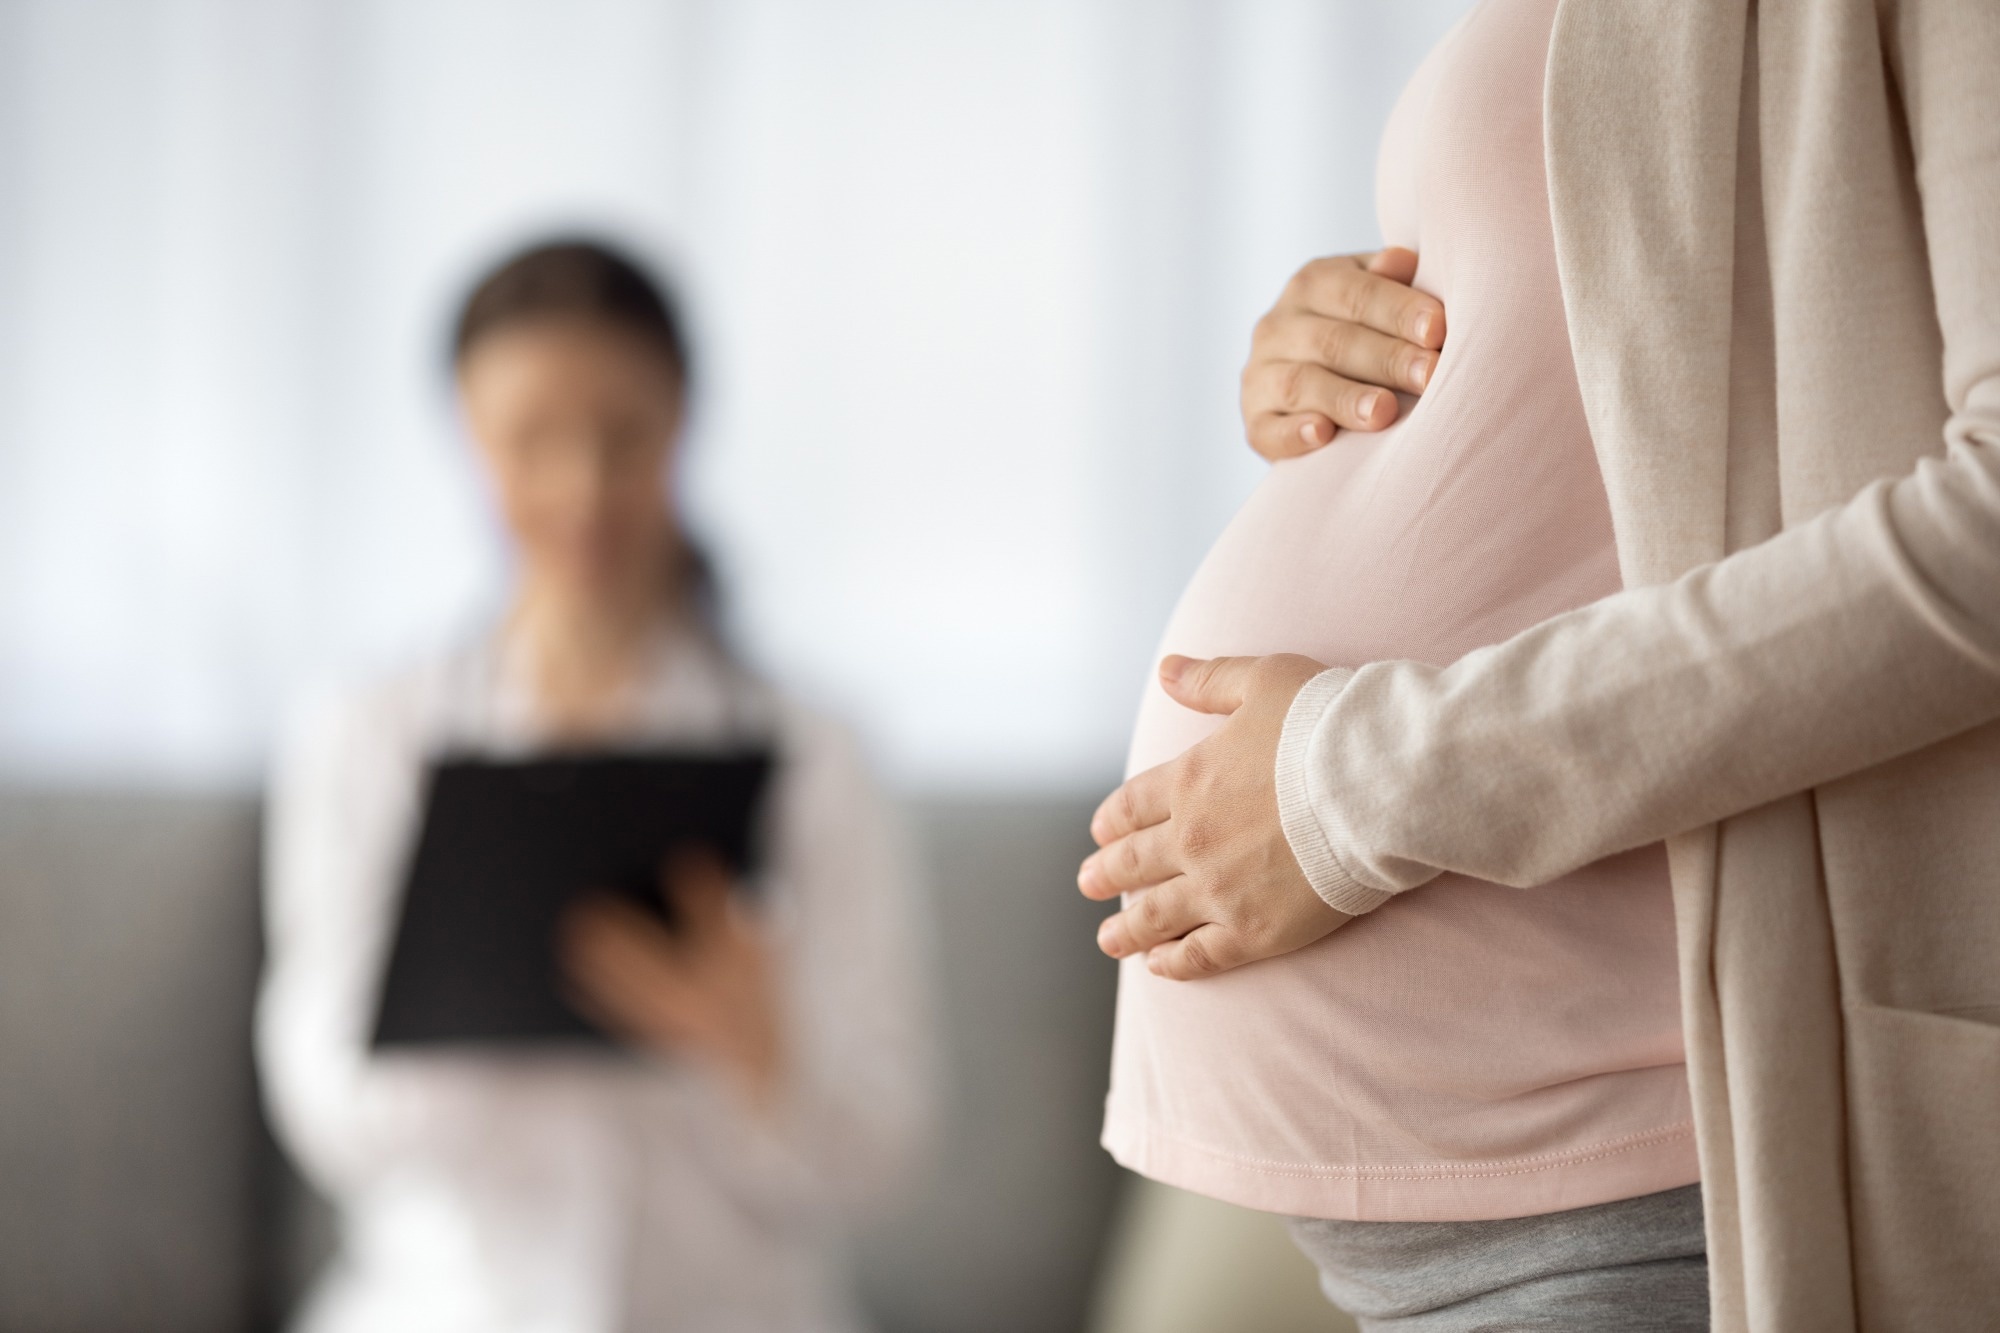 Study: Prenatal Exposure to Multiple Endocrine-Disrupting Chemicals and Childhood BMI Trajectories in the INMA Cohort Study. Image Credit: fizkes/Shutterstock.com